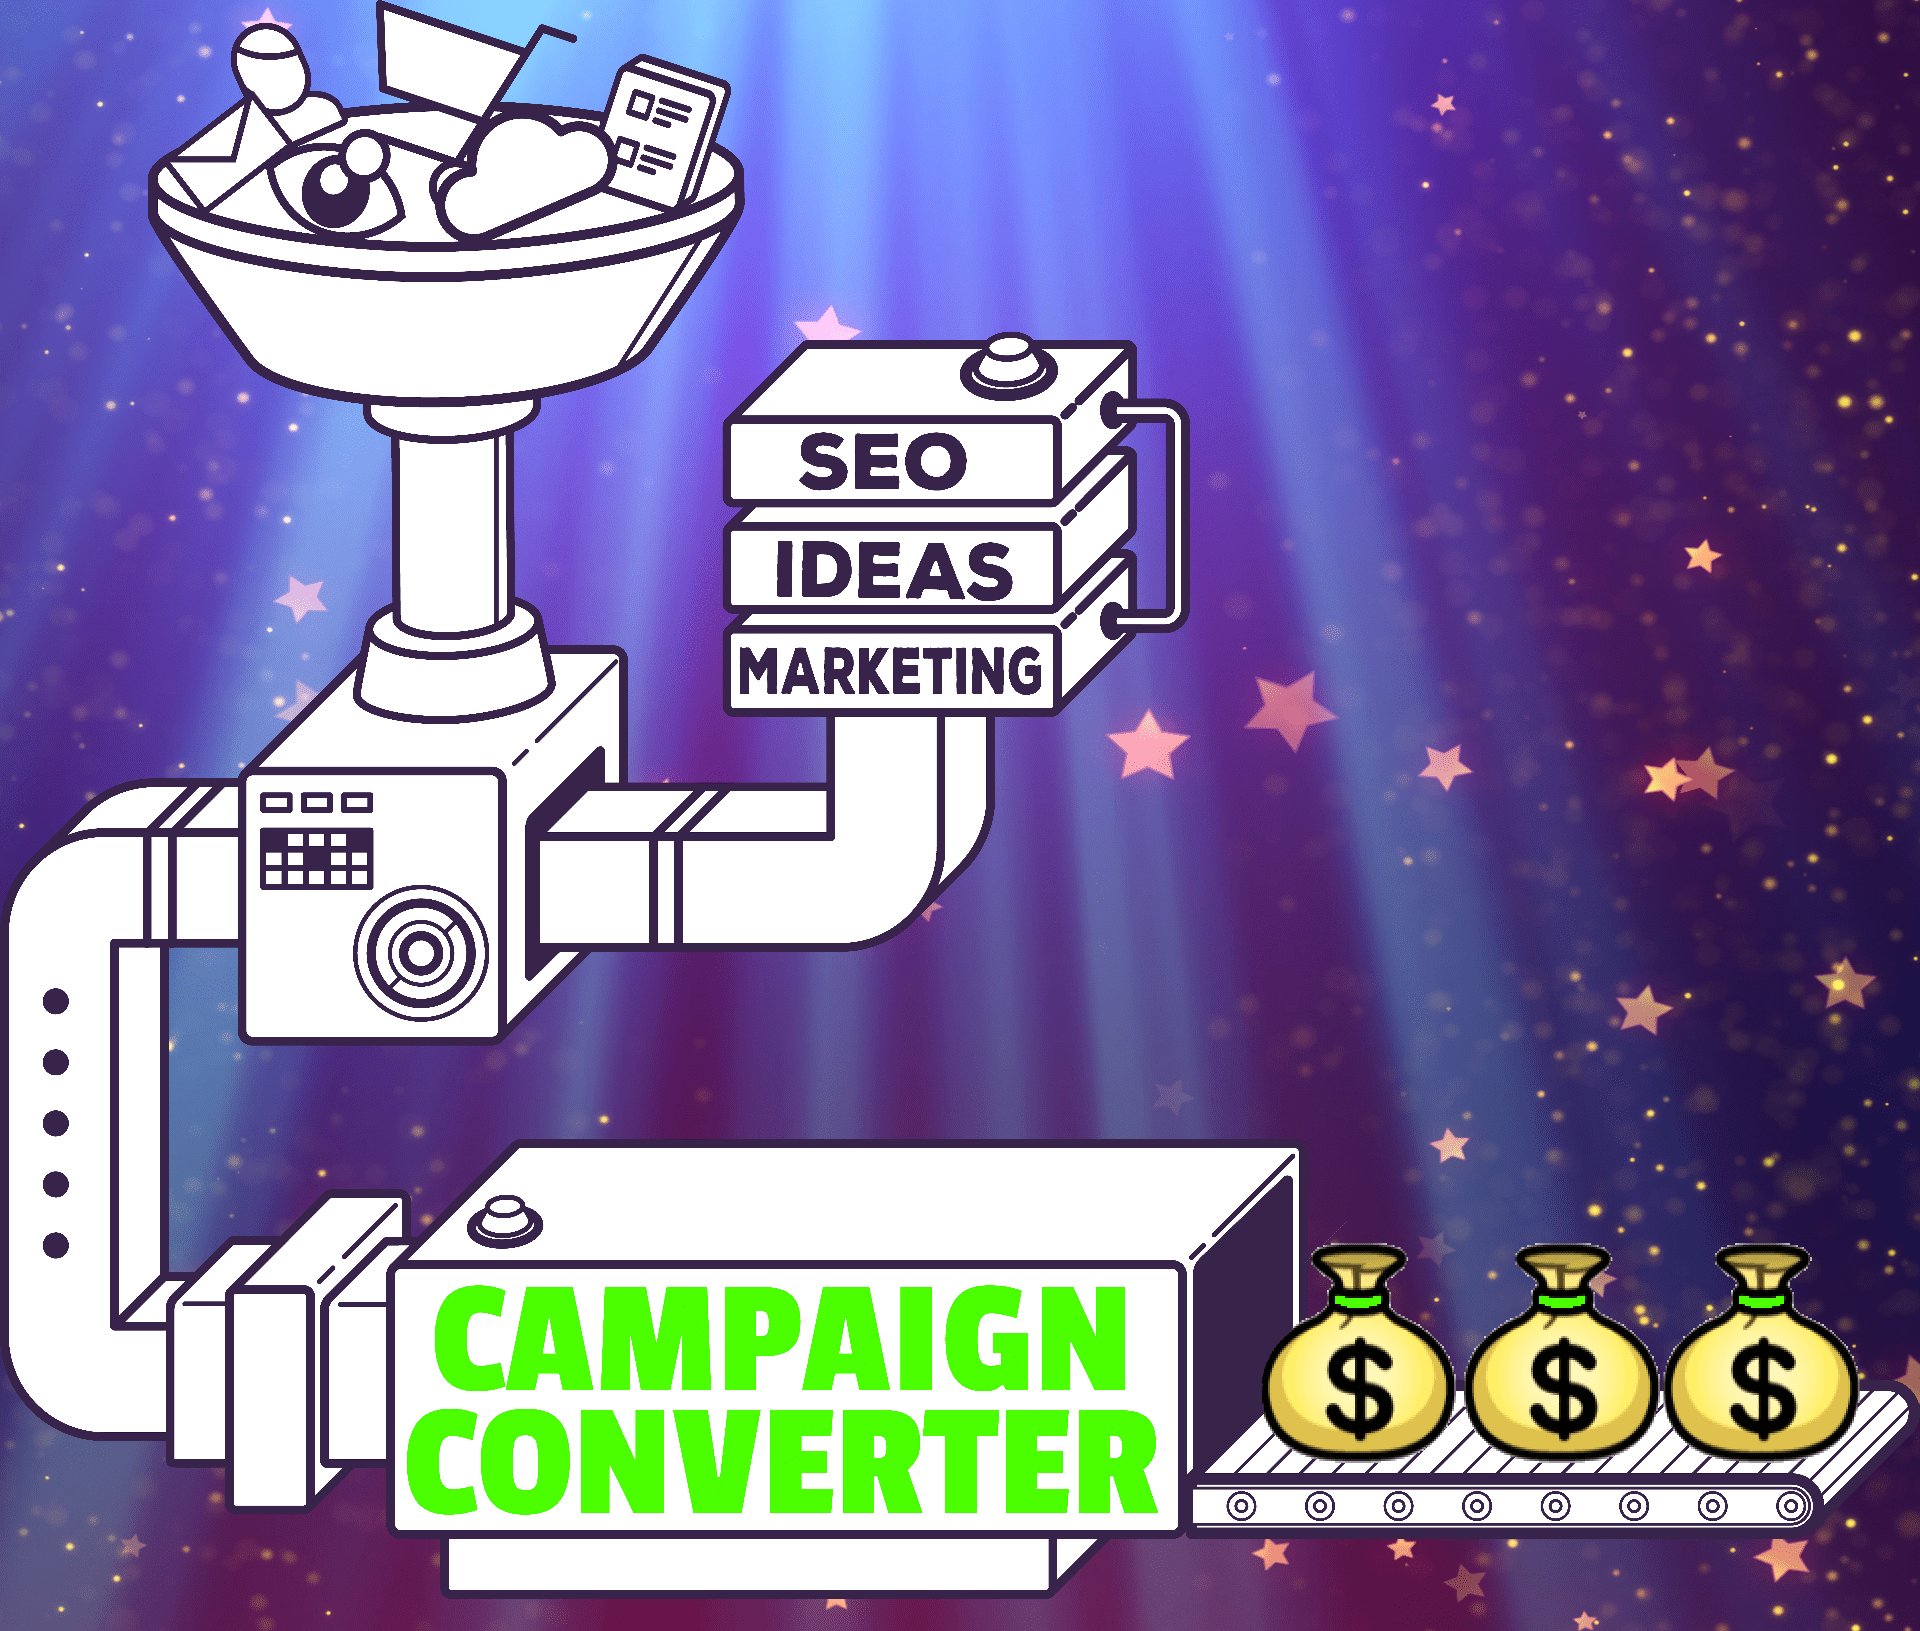 [GET] Campaign Converter – 10X YOUR ONLINE RESULTS..WITH CAMPAIGNS THAT CONVERT Free Download